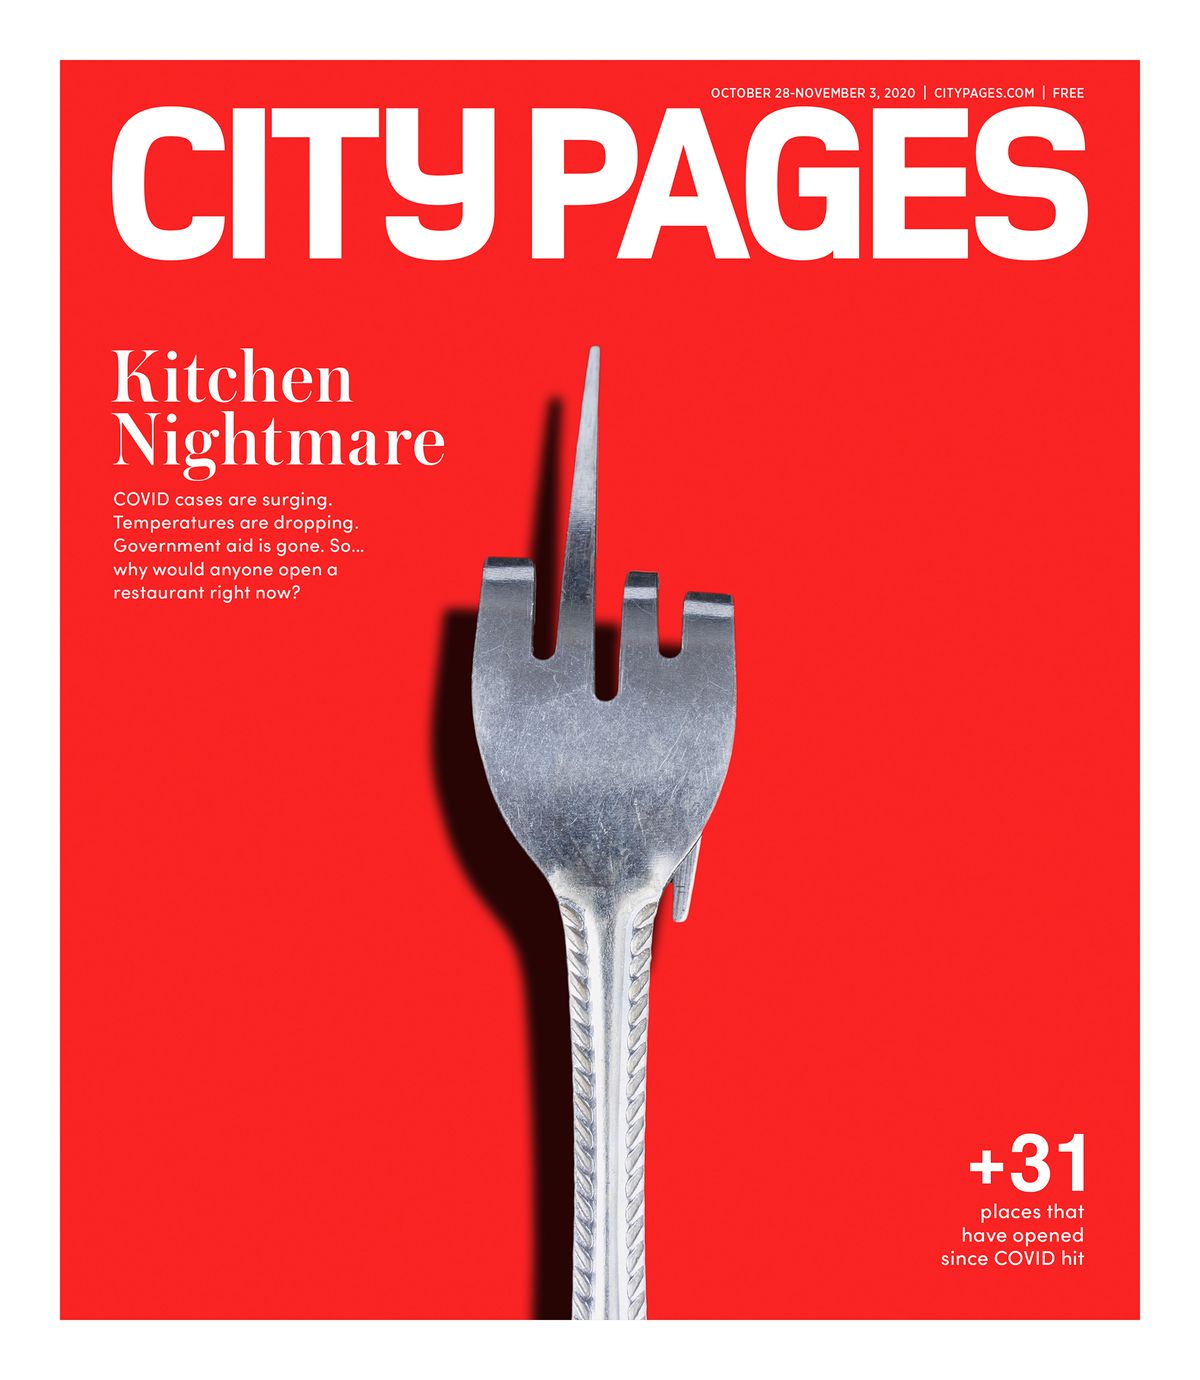 A silver fork with its tines pulled back to look like a middle finger on a red background. The cover story is called, “Kitchen Nightmare,” and says, “COVID cases are surging, so why would anyone open a restaurant right now?”